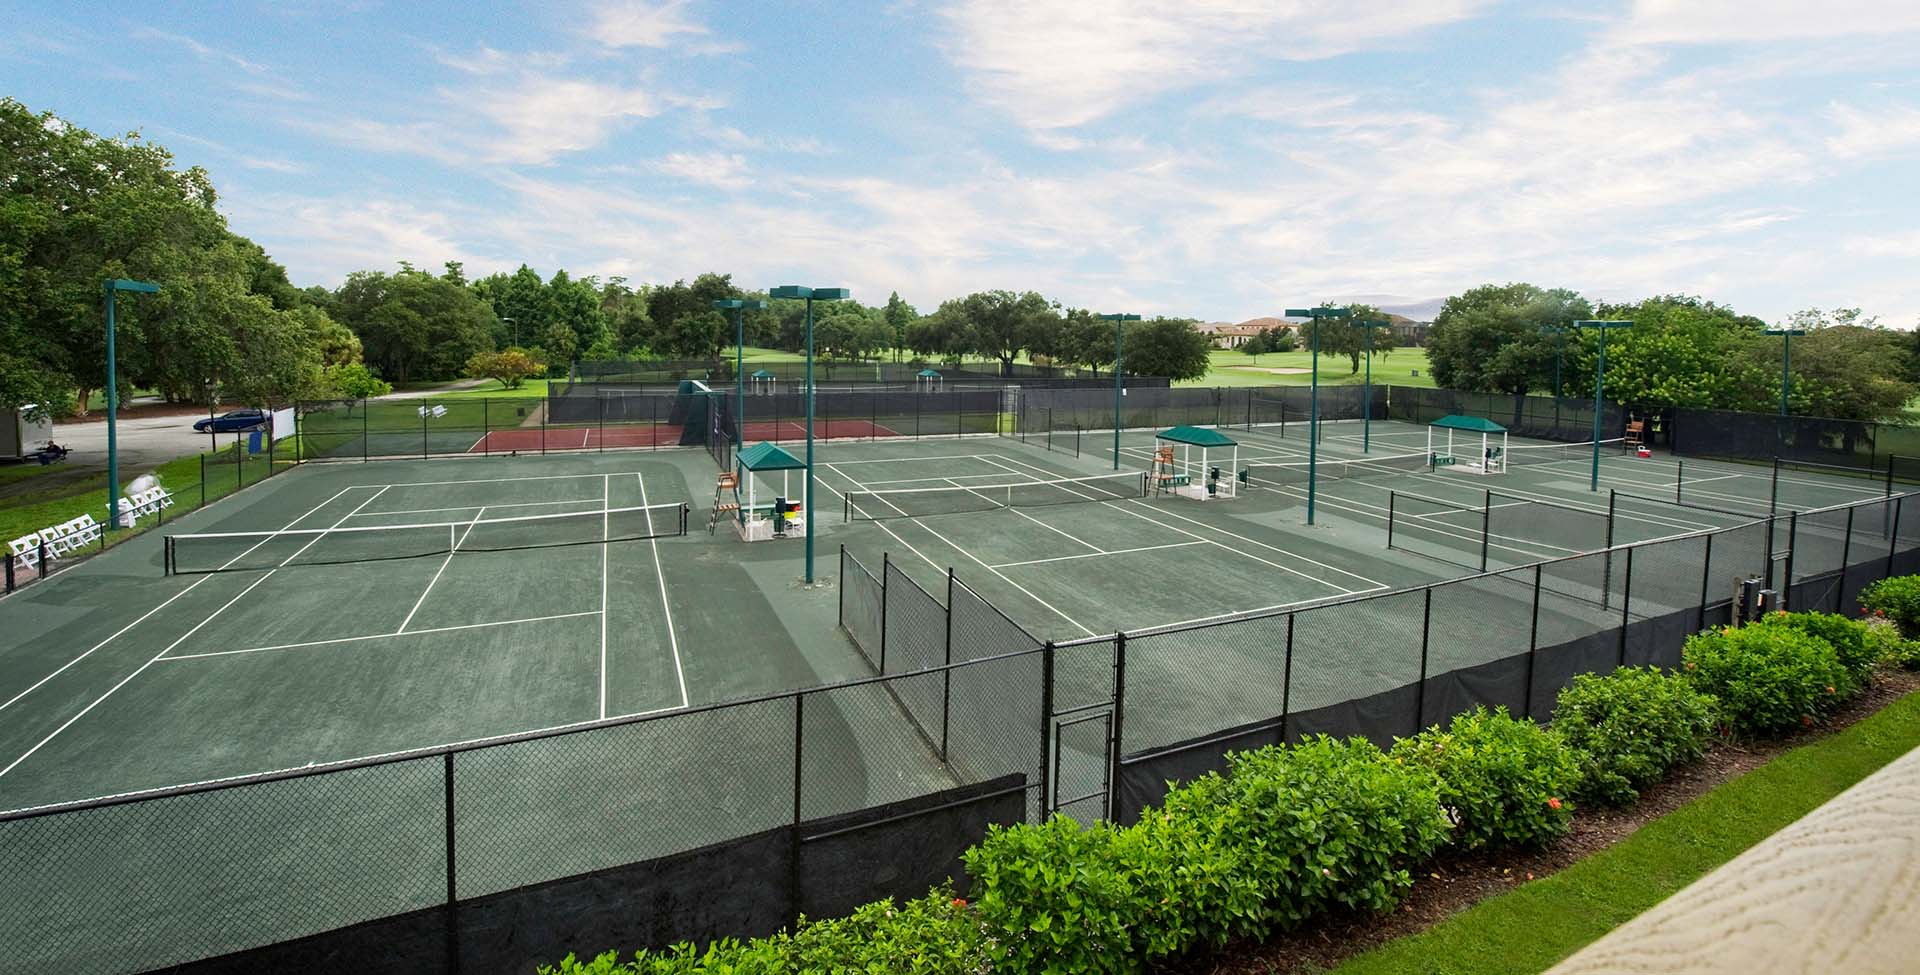 Multiple tennis courts